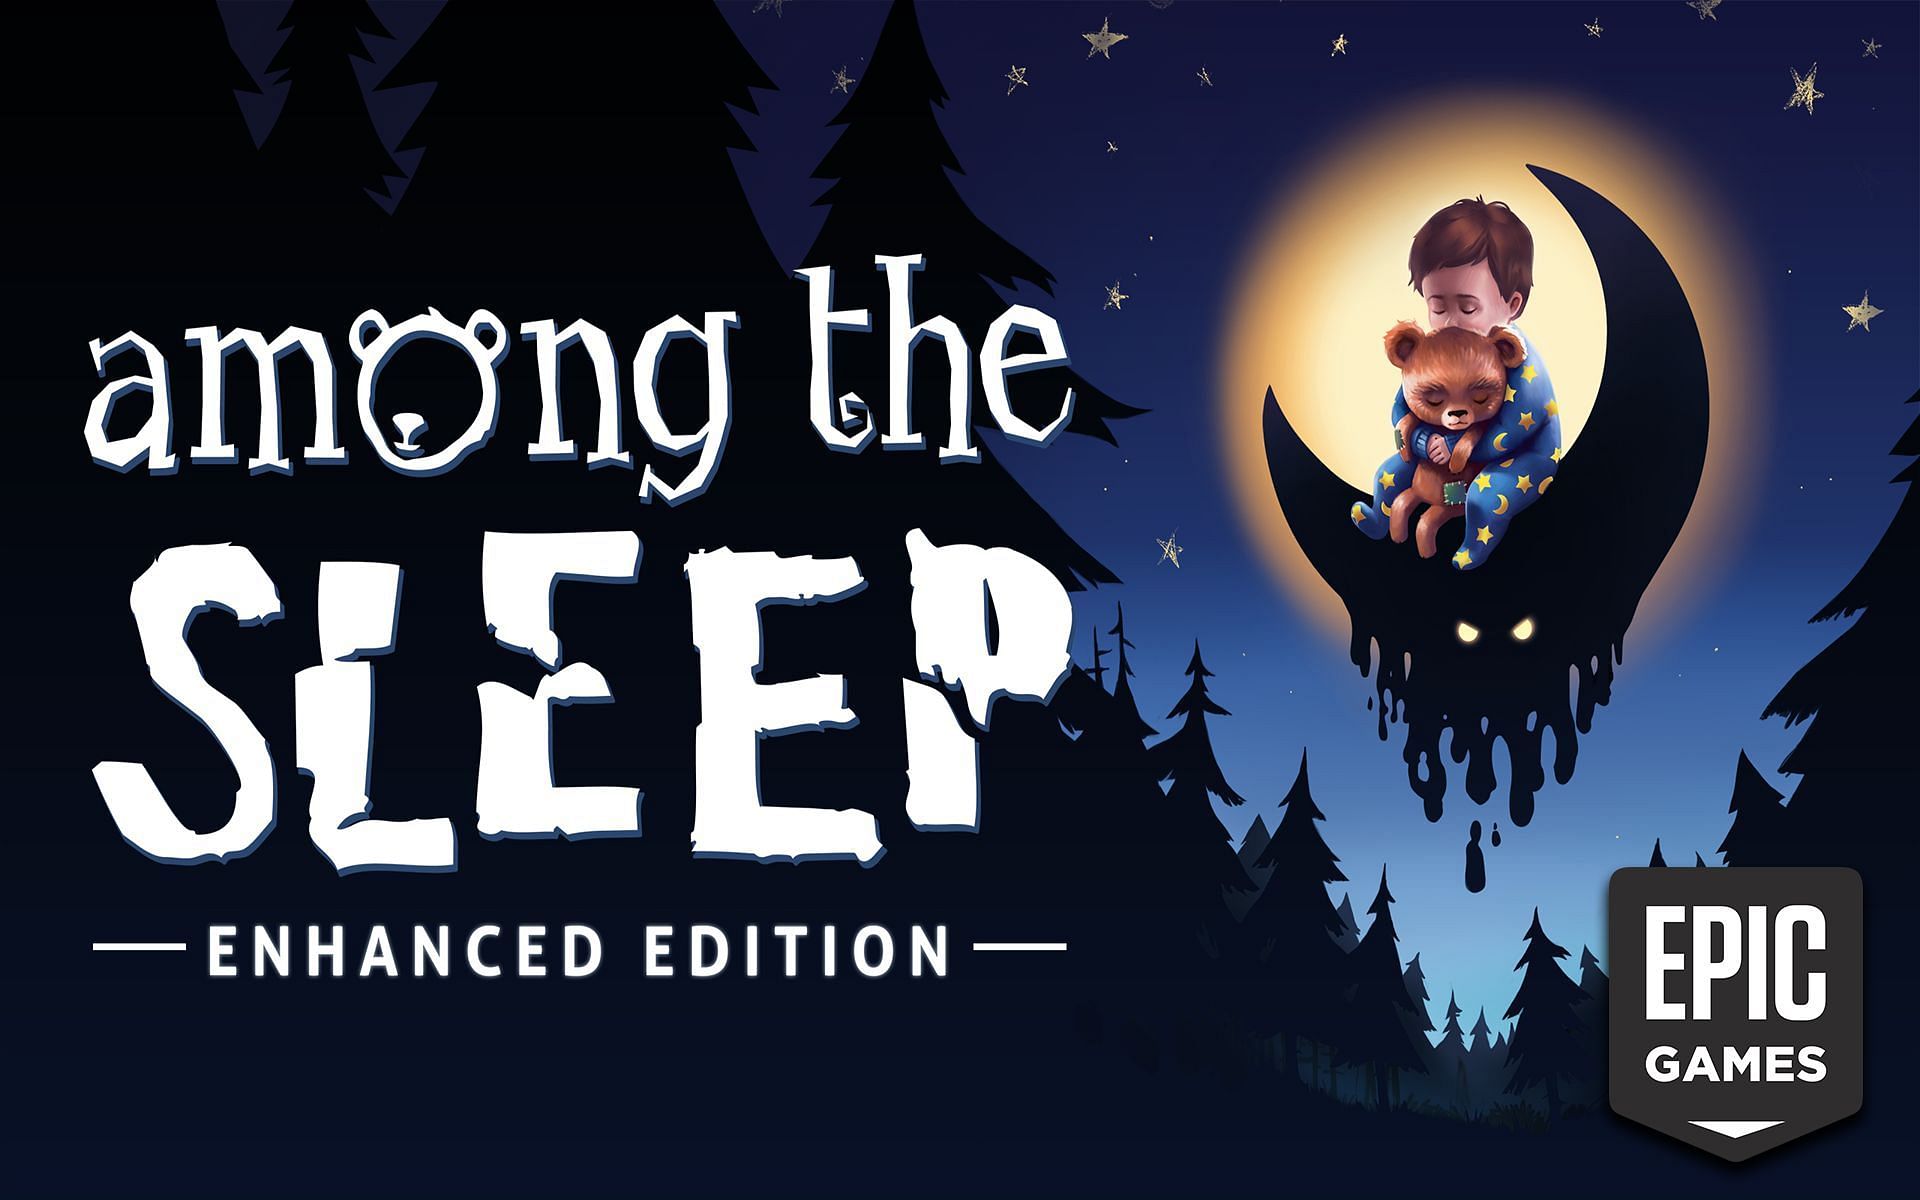 Among the Sleep: Enhanced Edition is the latest free game on Epic Games Store